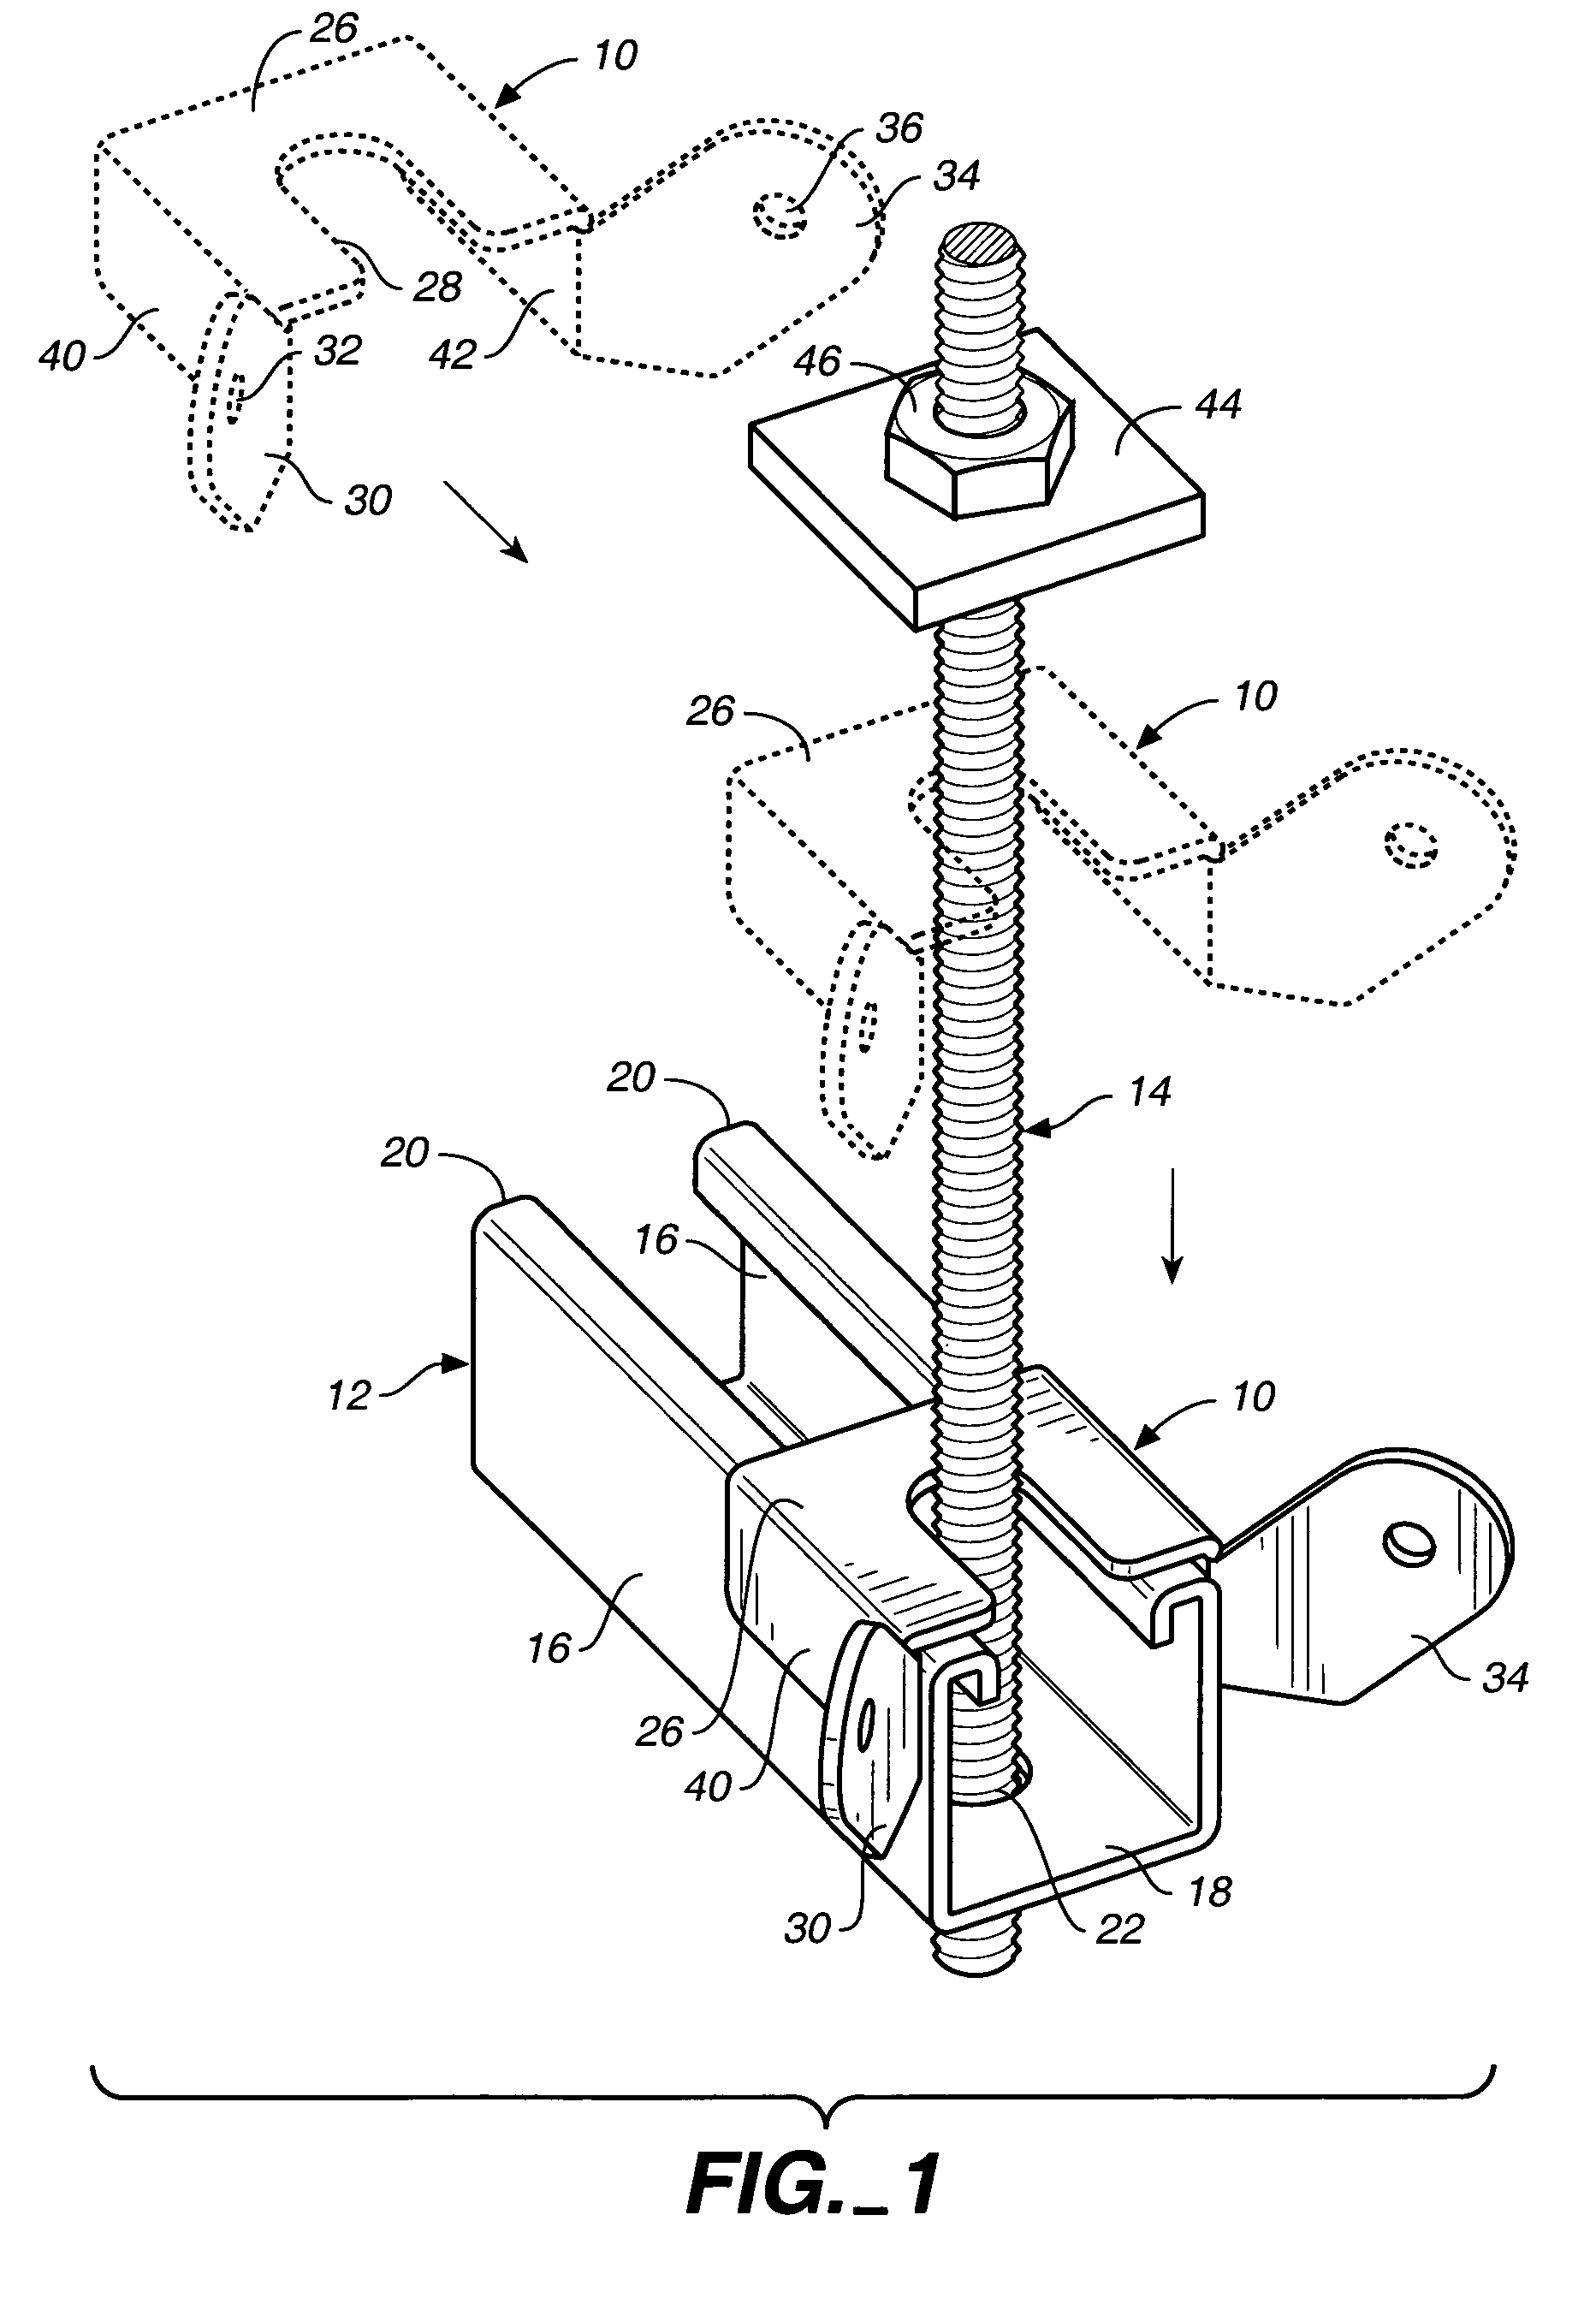 Structural member stabilizing system